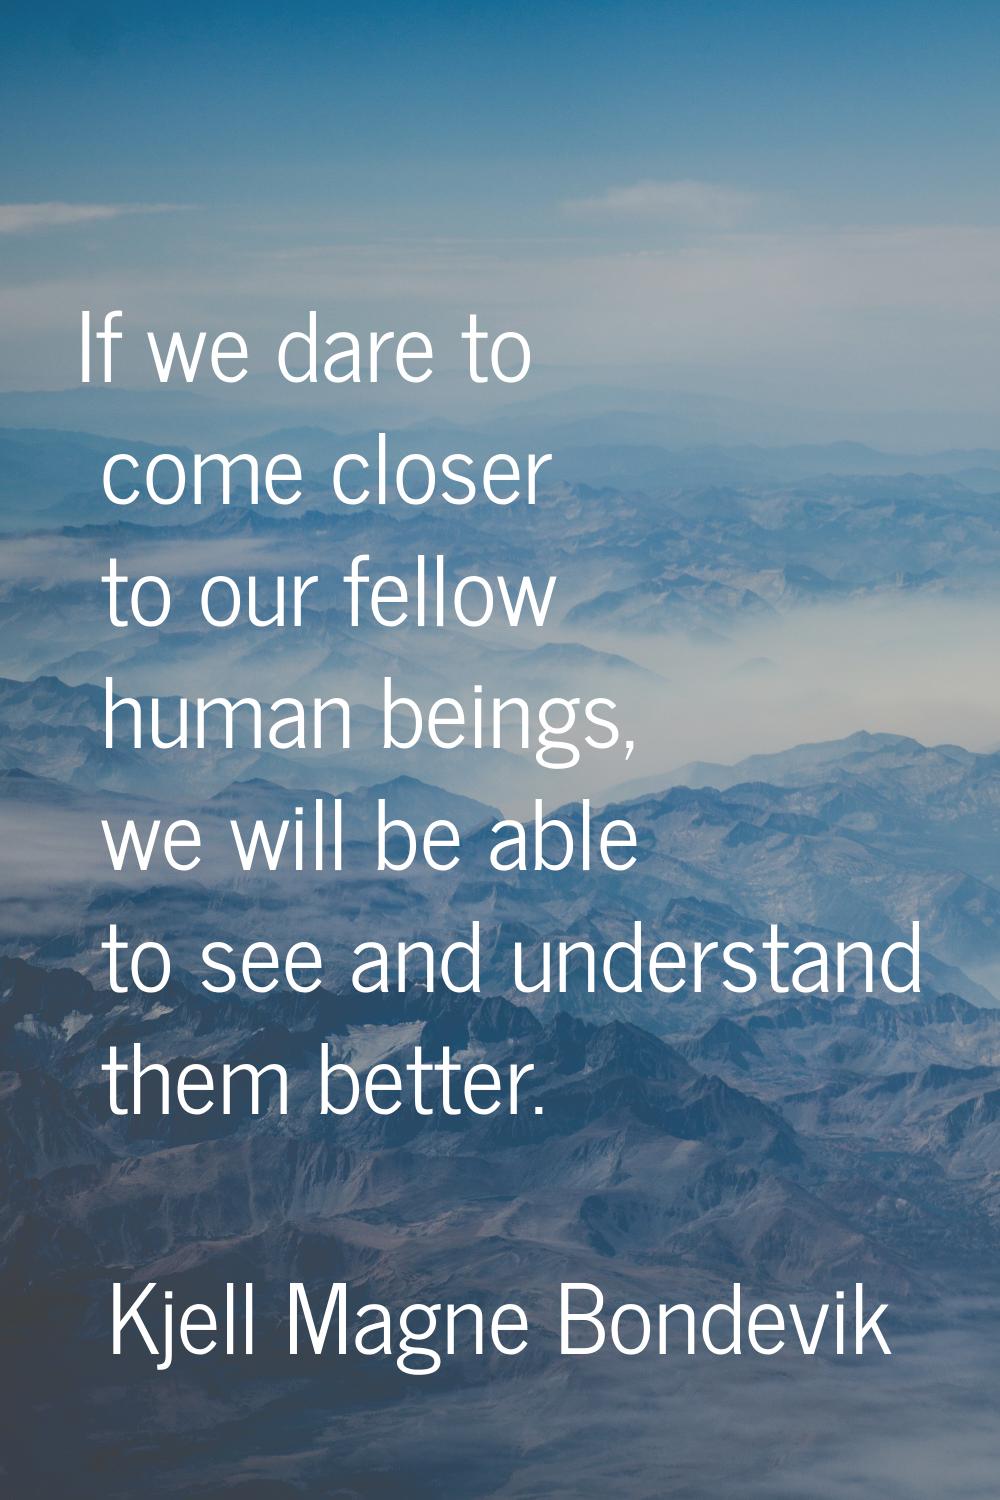 If we dare to come closer to our fellow human beings, we will be able to see and understand them be